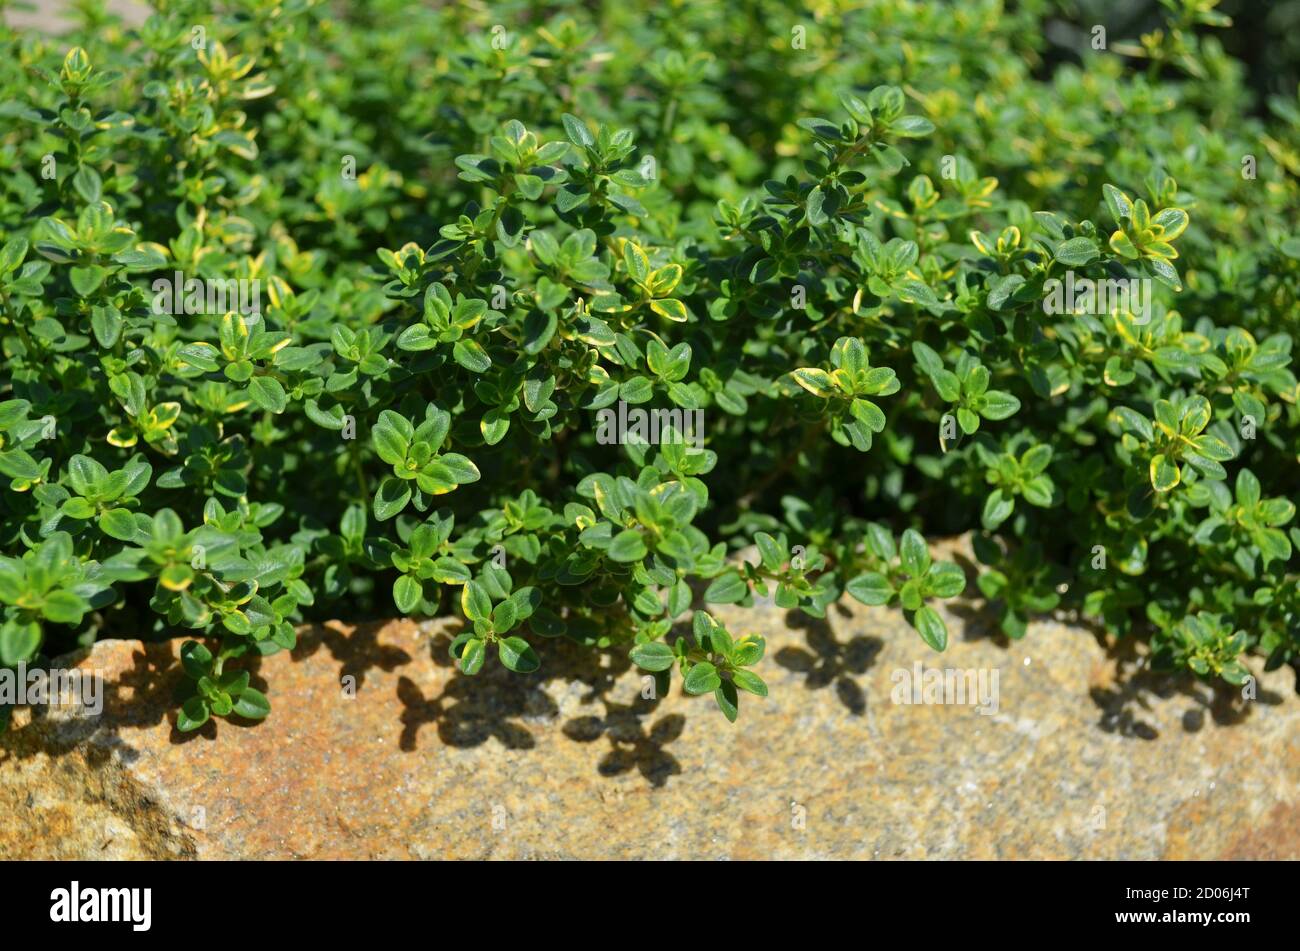 Lemon thyme or the citrus thyme - fragrant perennial herb with aroma to that of lemon. A macro image of fresh green thyme growing outdoors. Stock Photo